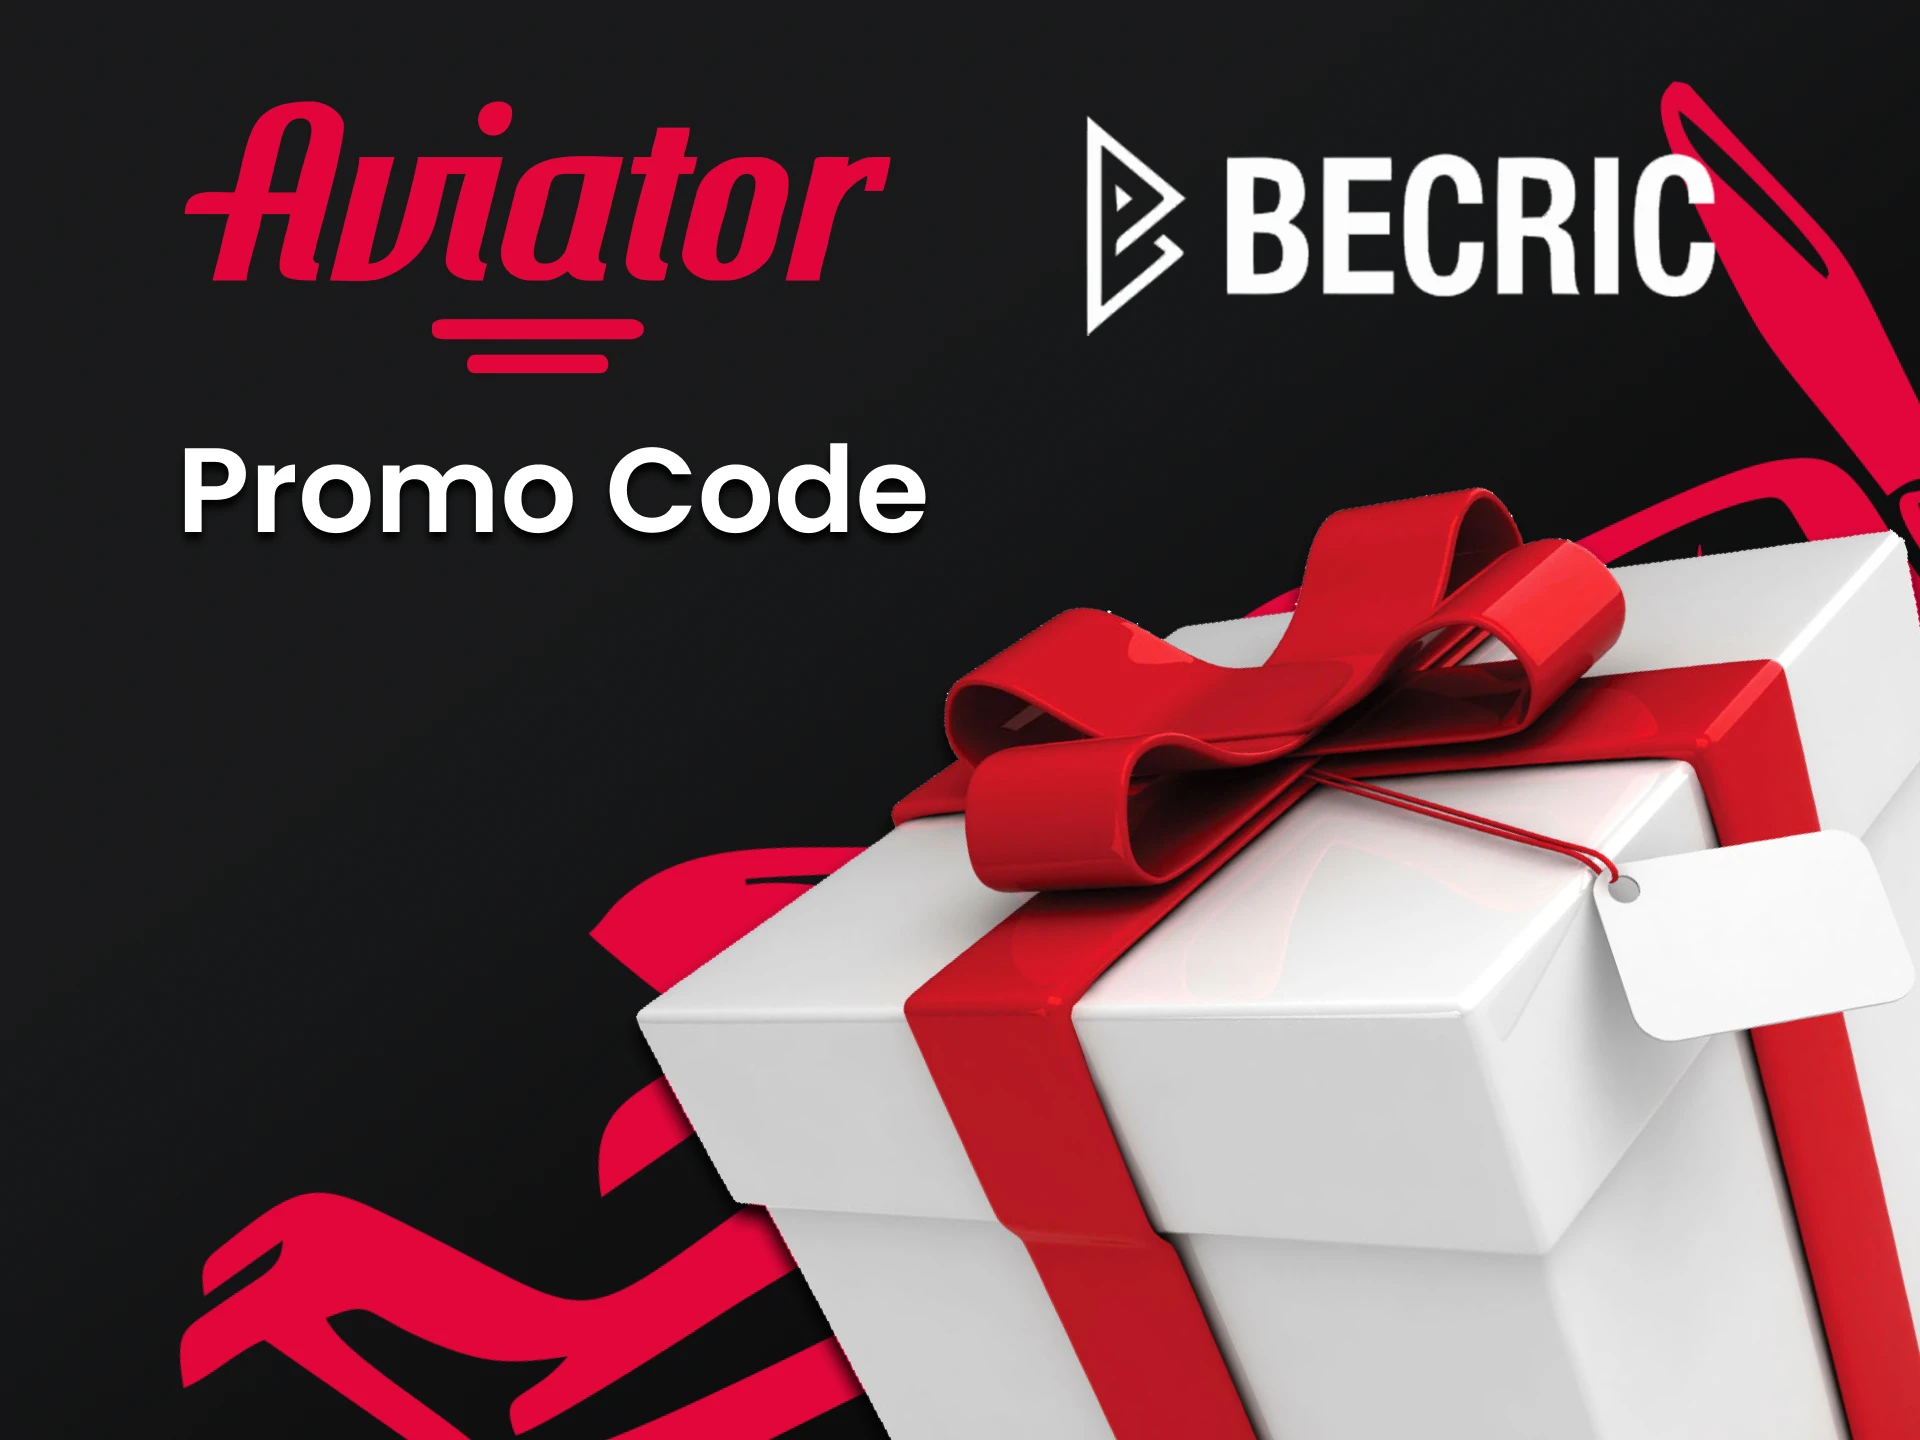 Use the code and get bonuses for playing Avaitor on Becric.